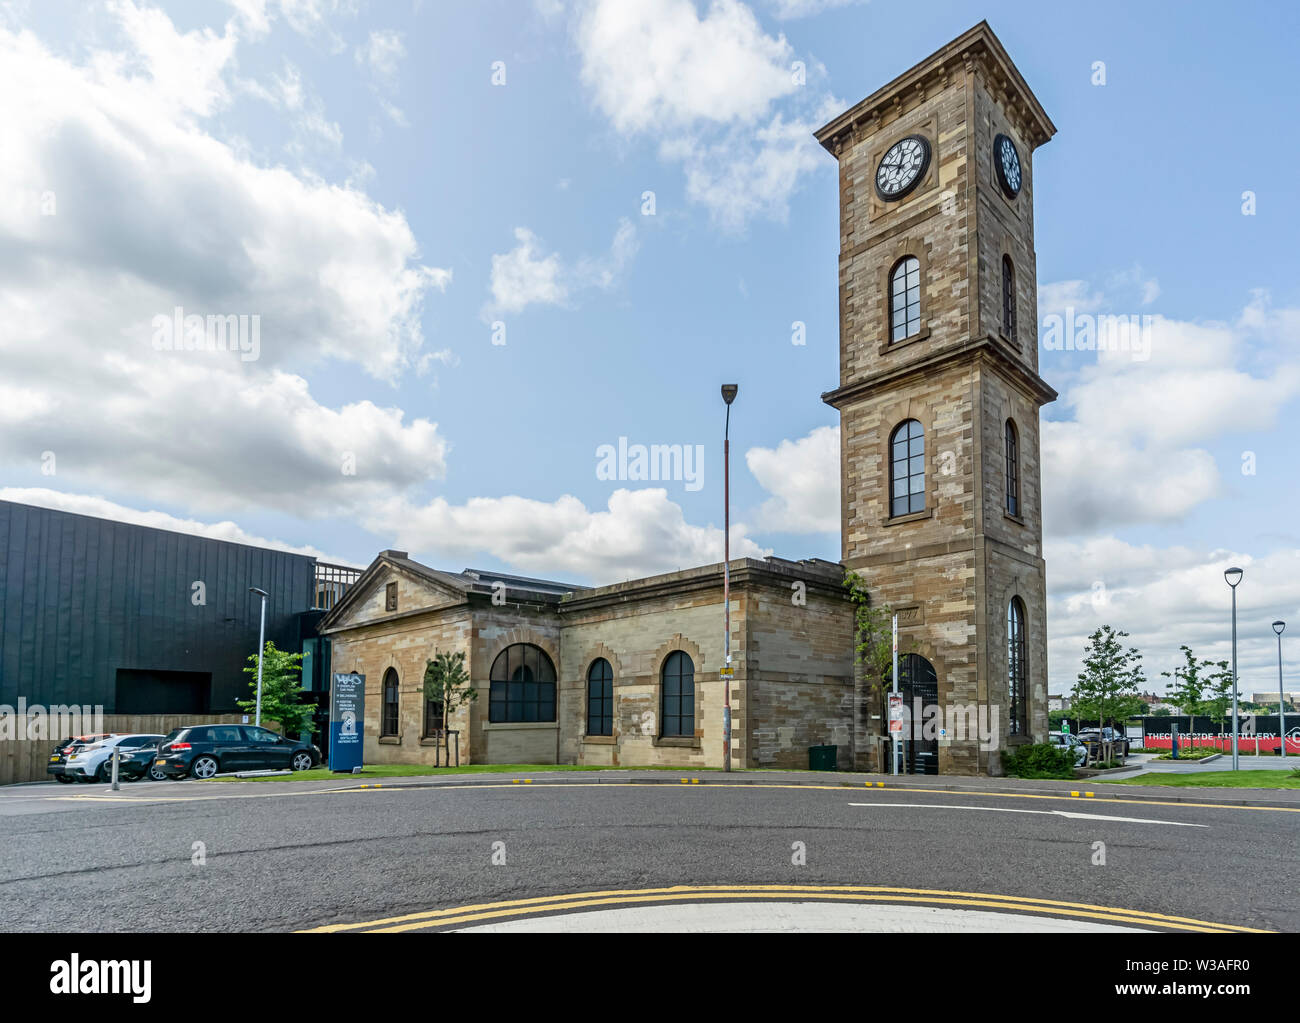 The Clydeside Distillery, The Old Pump House, Queen's Dock, Stobcross Road, Glasgow, Scotland, UK Stock Photo